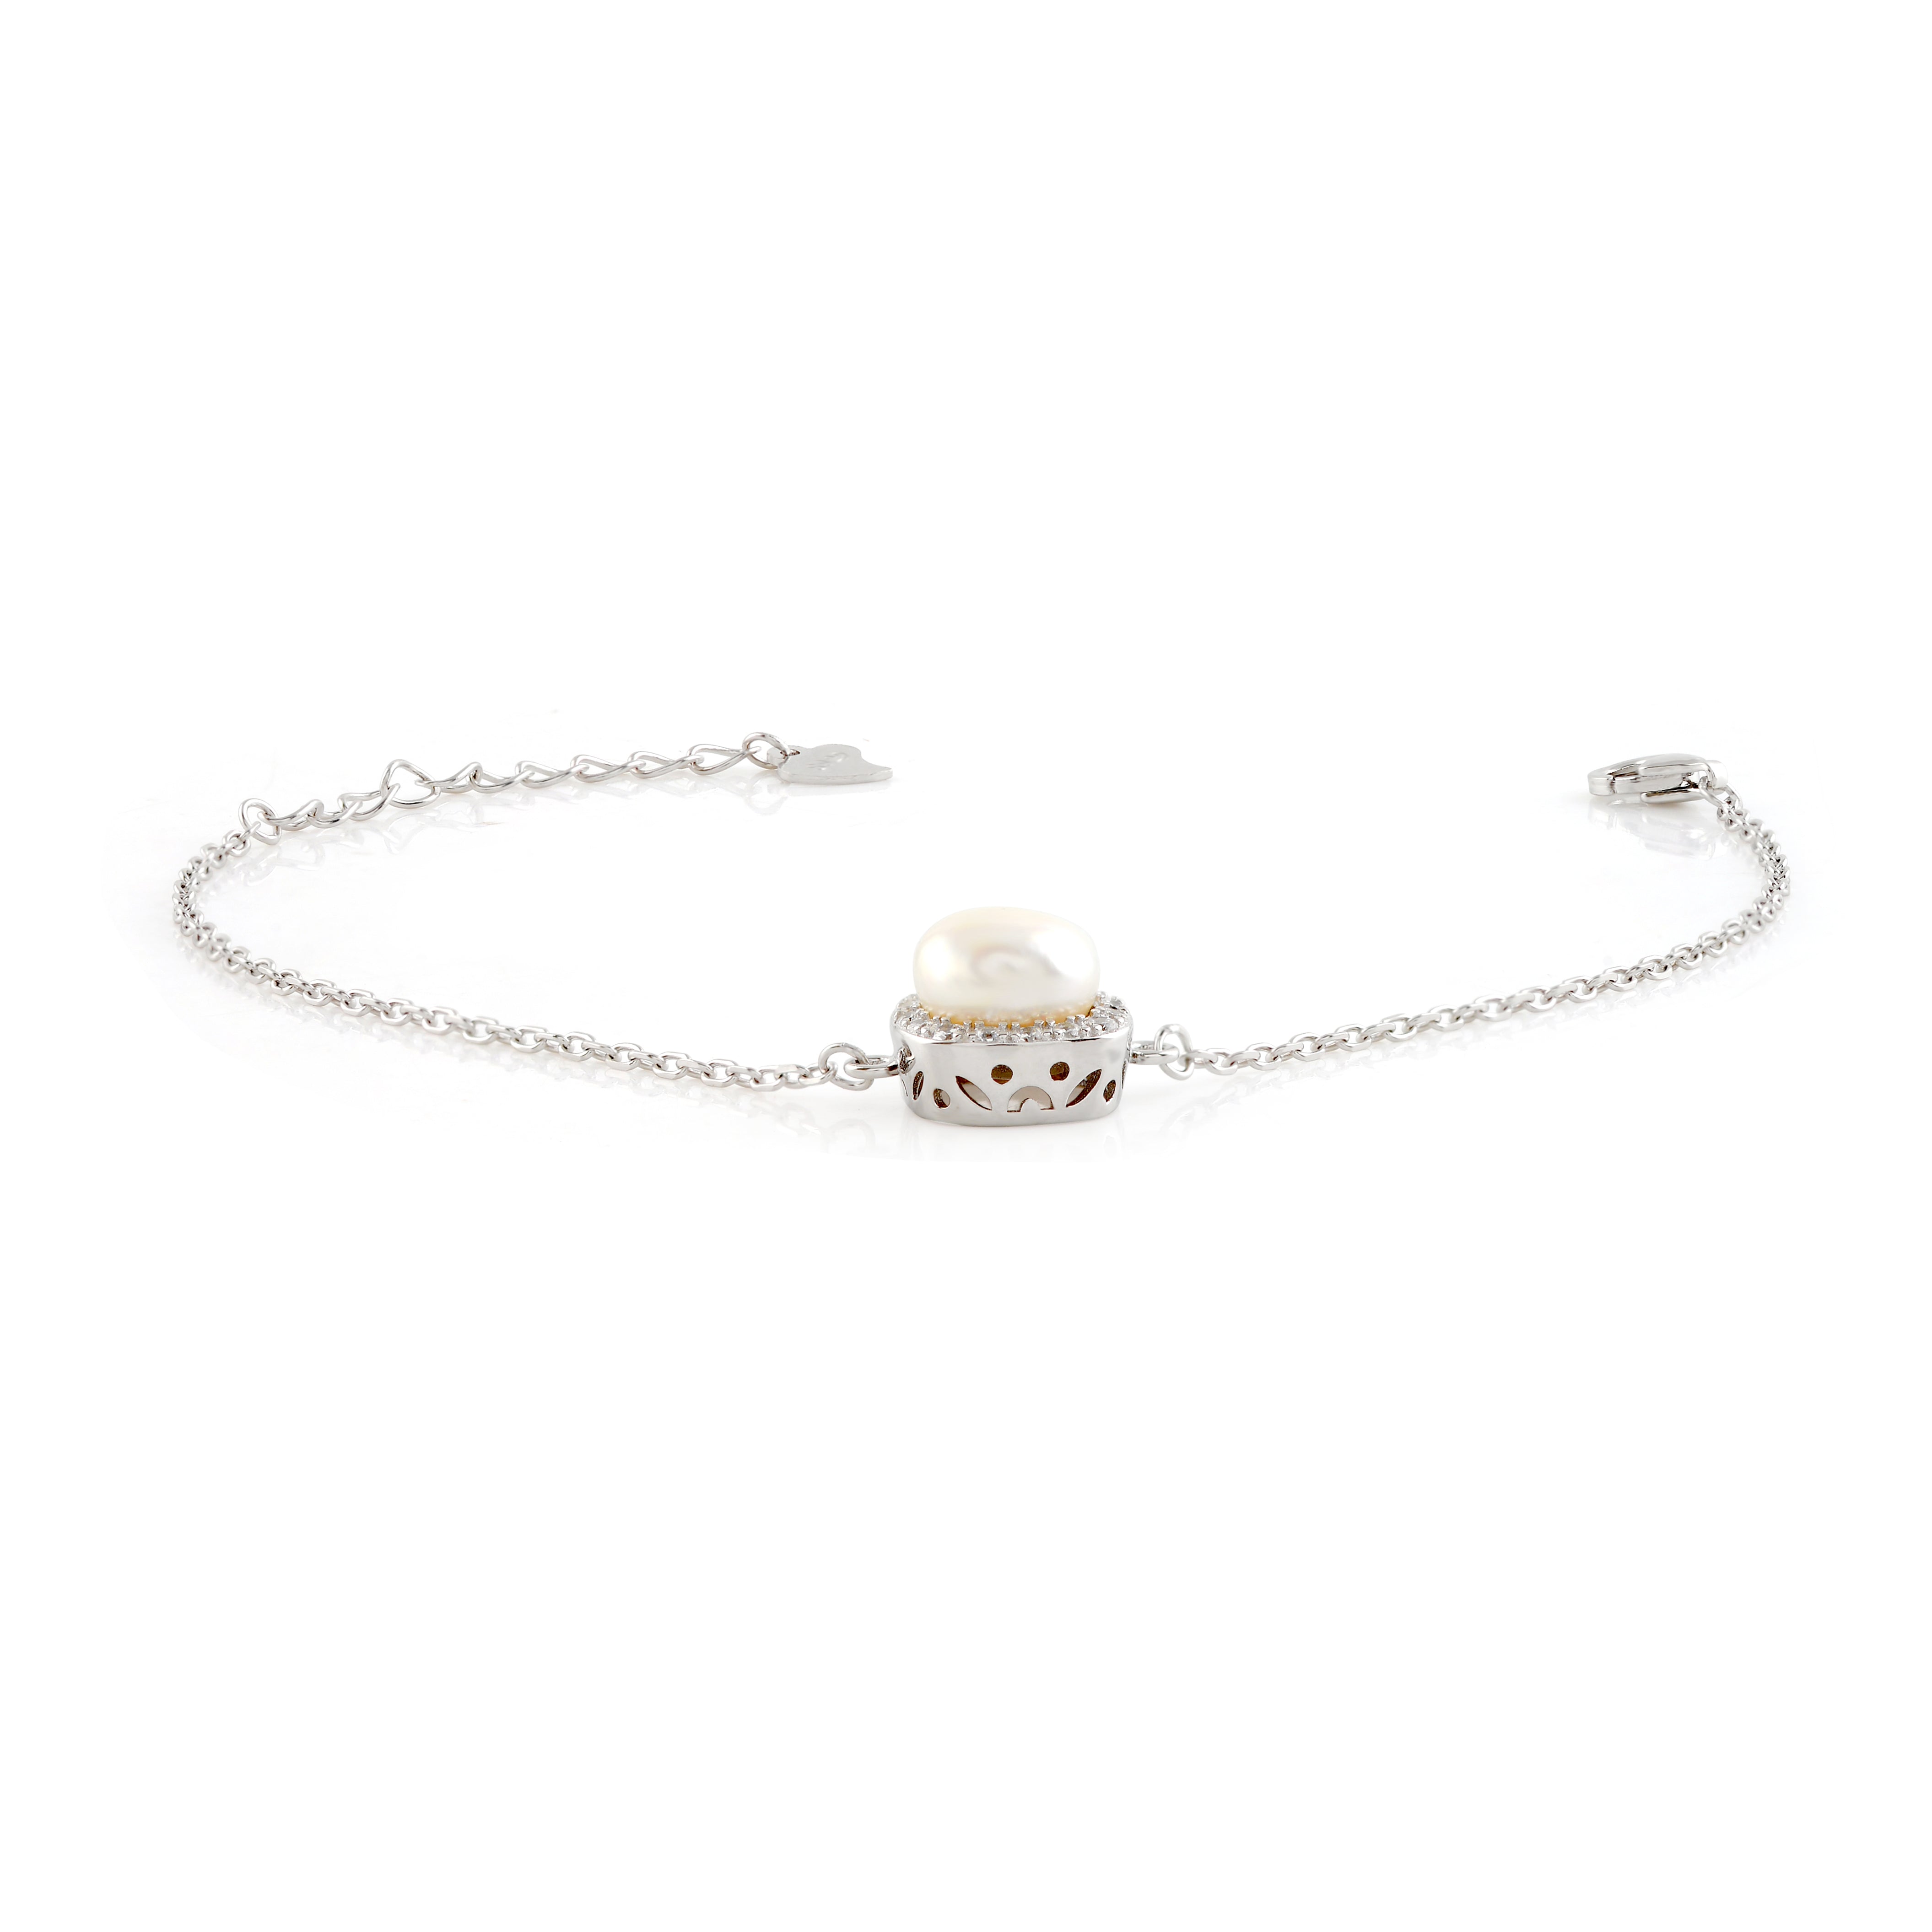 Stunning Bracelet with Fresh Water Pearl and CZ Stones